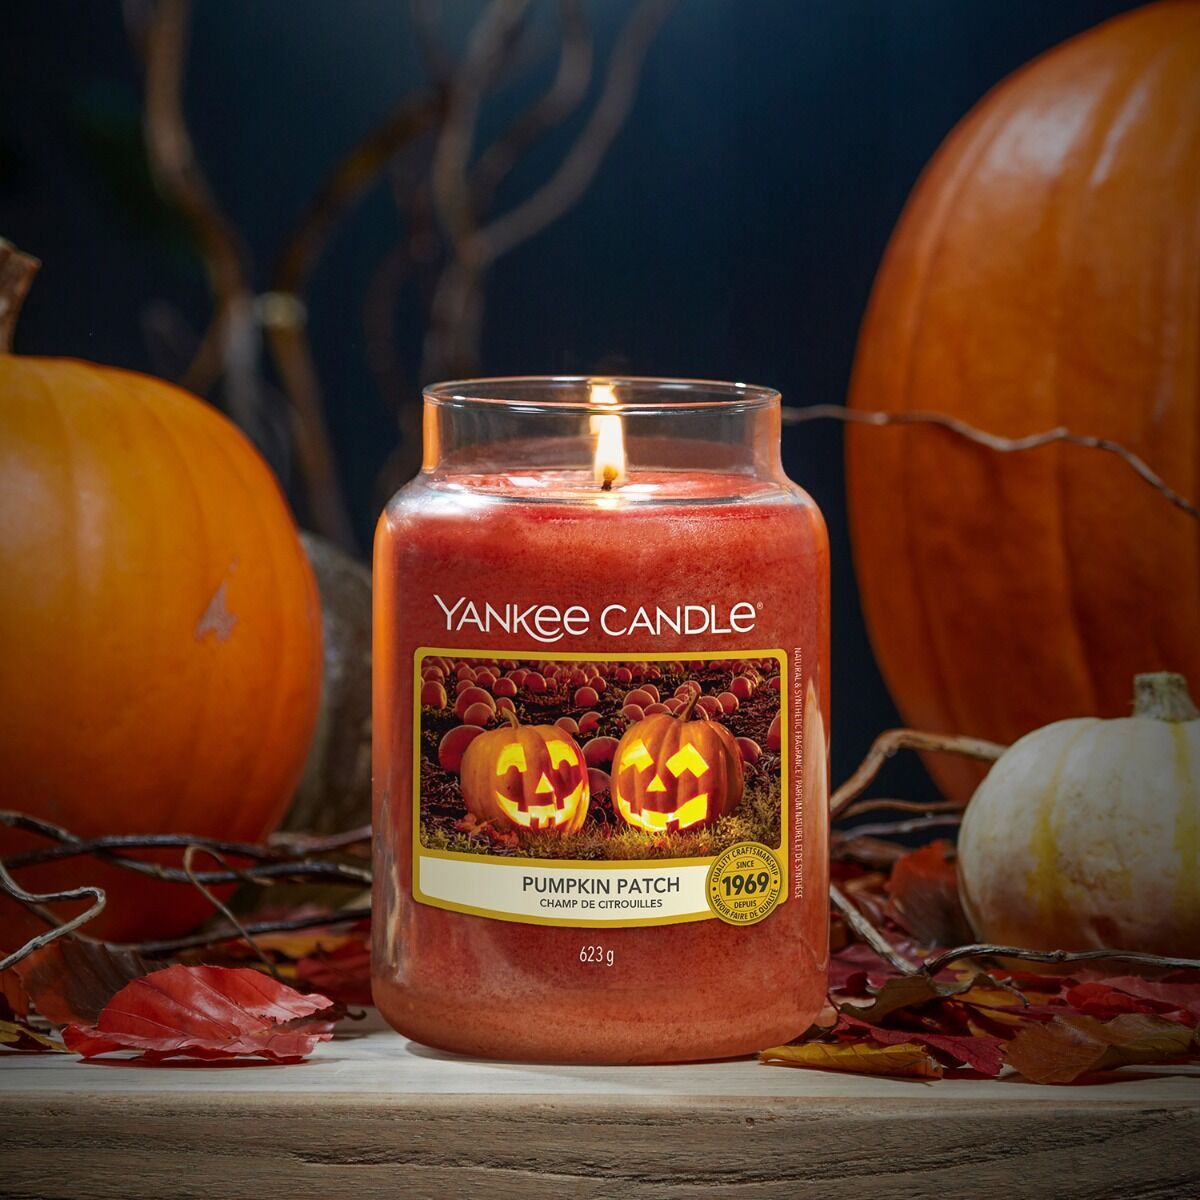 https://hips.hearstapps.com/hmg-prod/images/yankee-candle-launches-pumpkin-patch-candle-1599743400.jpg